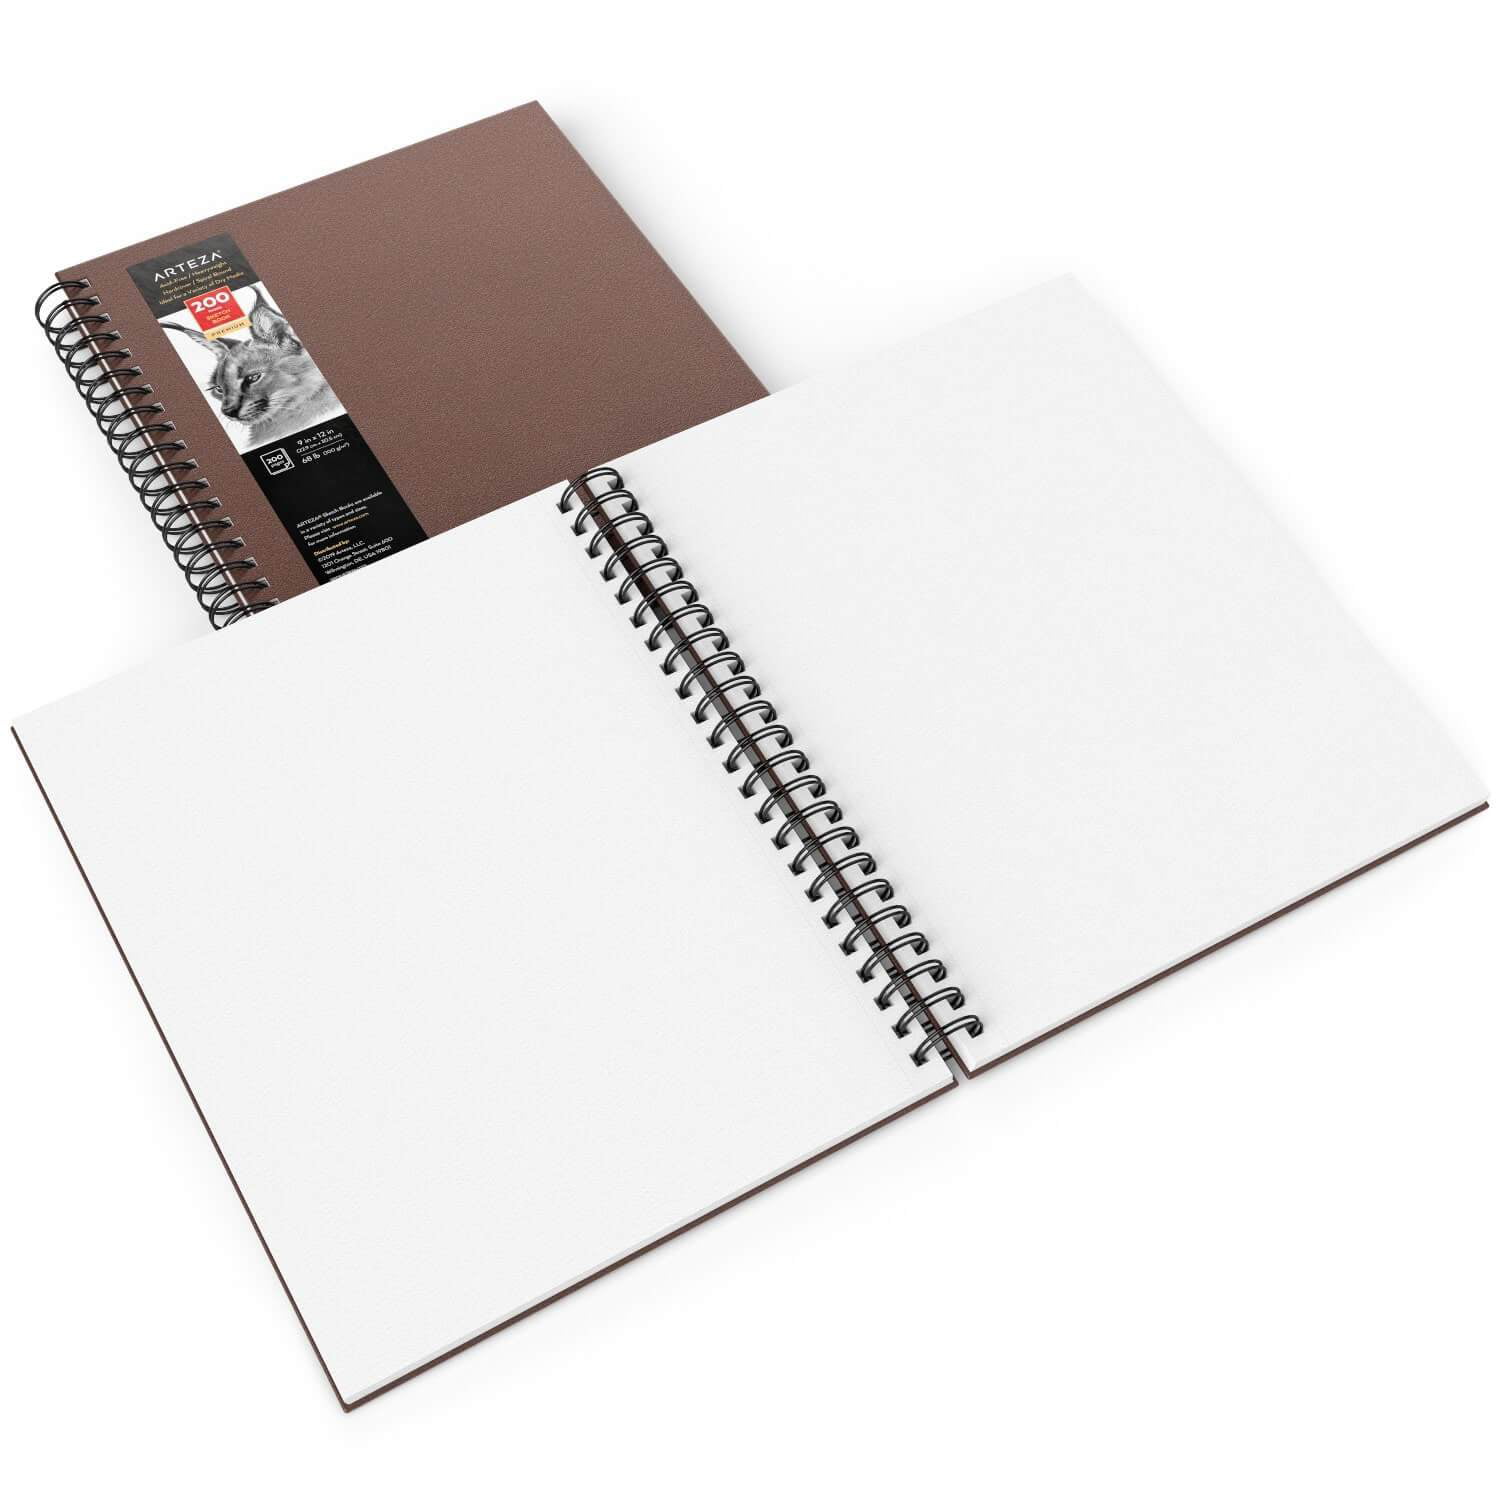 Zenacolor 200 Sheets Professional Sketch Book Set 9x12 with Spiral Bound - 2 x Sketch Pad with White Drawing Paper (100 g) - Blank Artist Sketchbook W